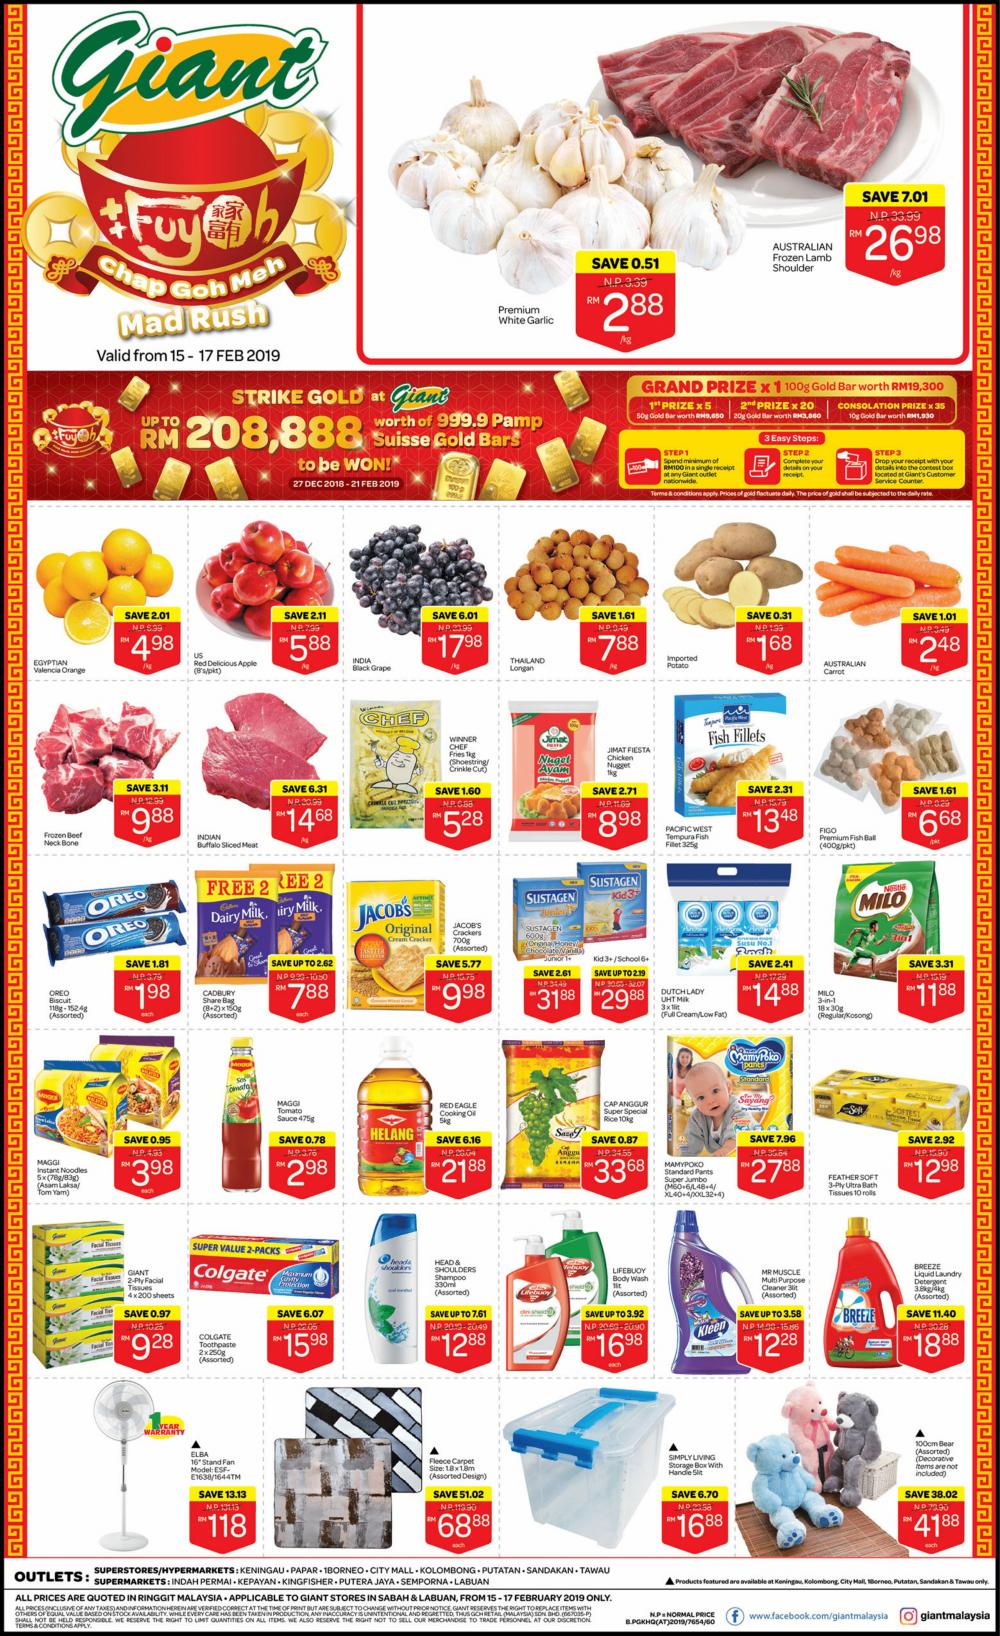 Giant Weekend Promotion at Sabah and Labuan (15 February 2019 - 17 February 2019)